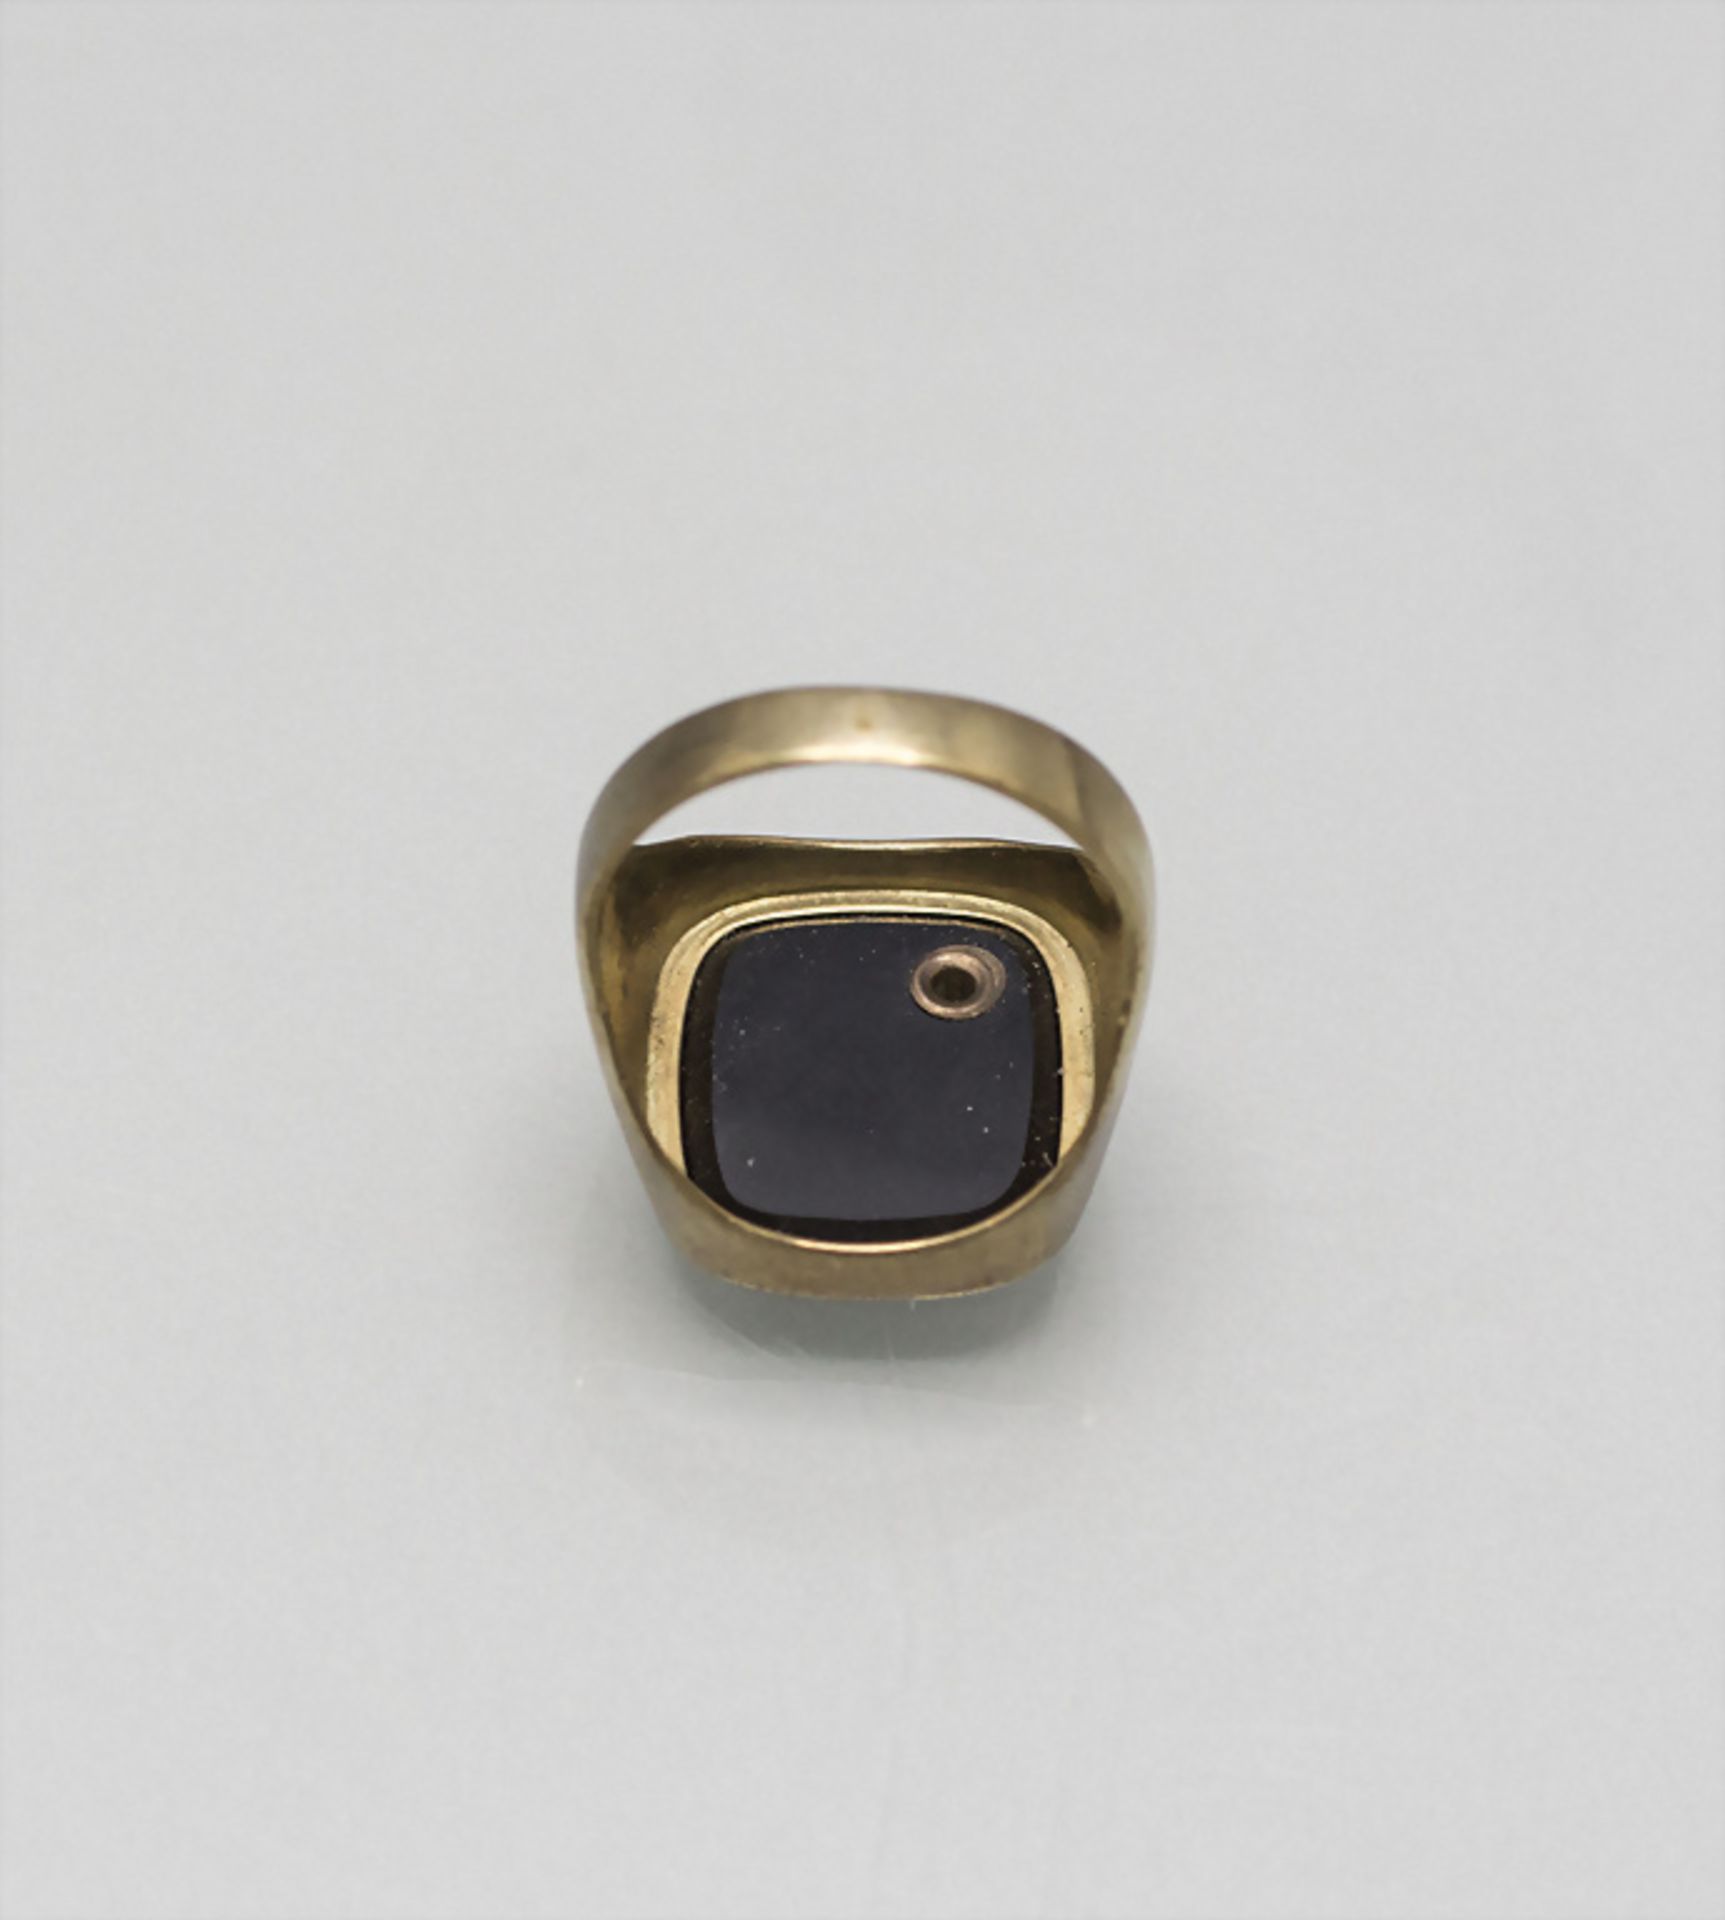 Herrenring mit Onyx und Diamant / A men's 8 ct gold ring with onyx and diamond - Image 2 of 5